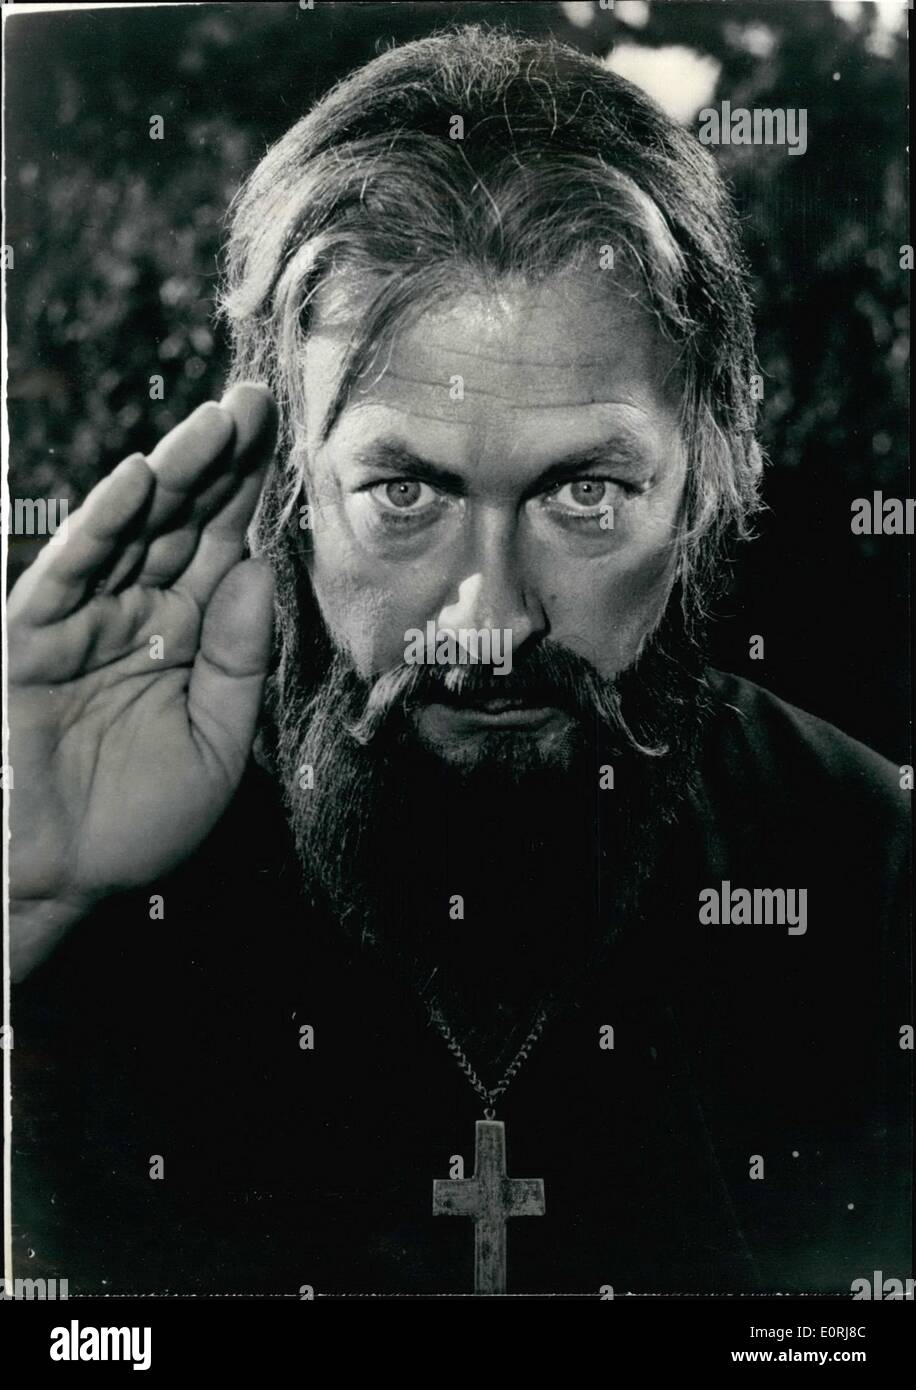 Oct. 10, 1959 - Curd Jurgens As Rasputin: The Strange Personality Of Rasputin, The Famous Russian Monk Who Was Killed By Prince Stock Photo